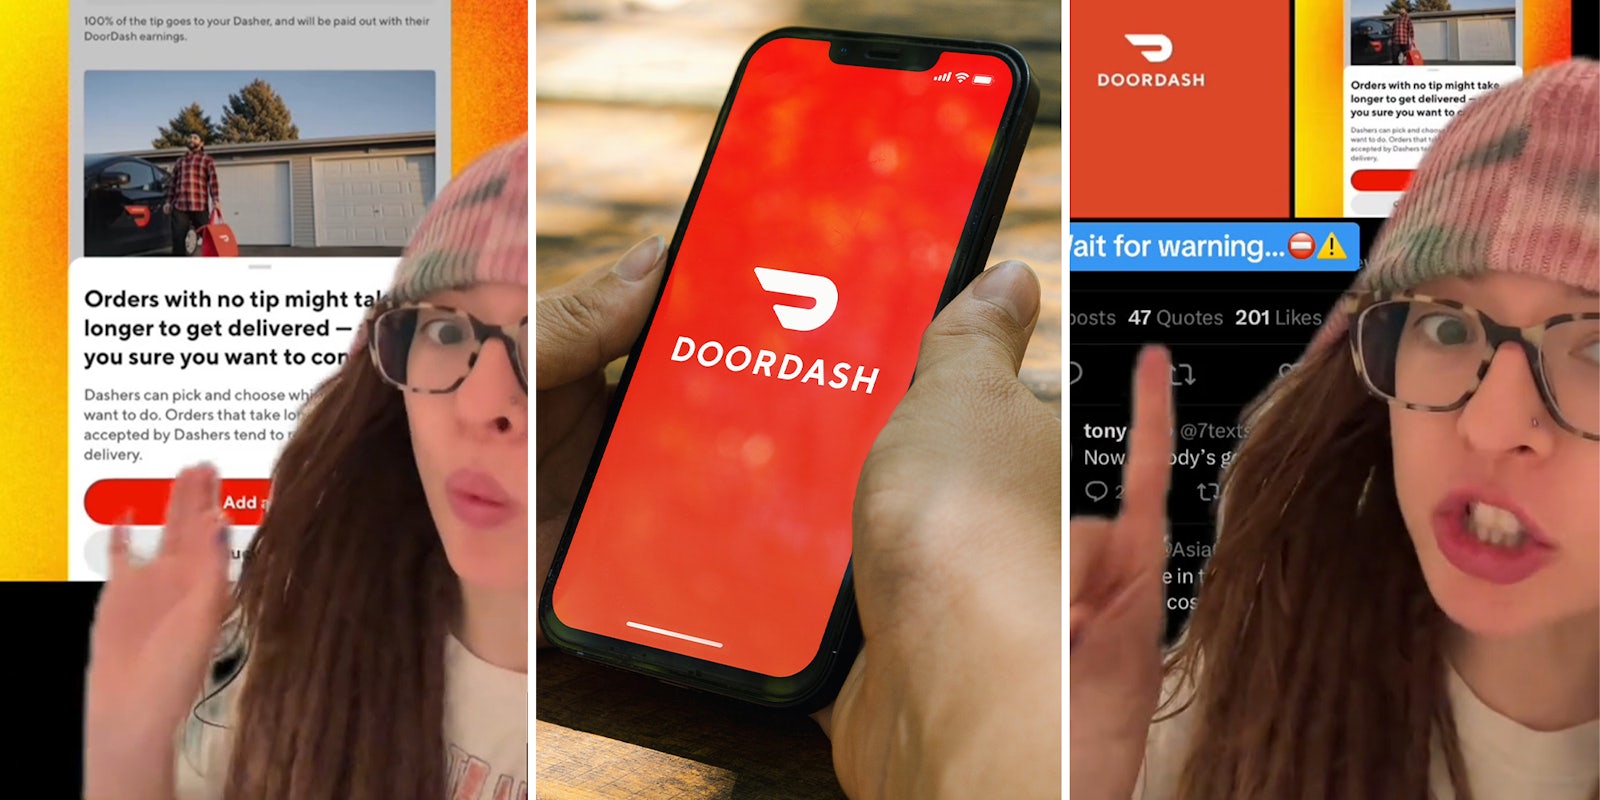 Doordash warns customers no tipping may result in longer wait times